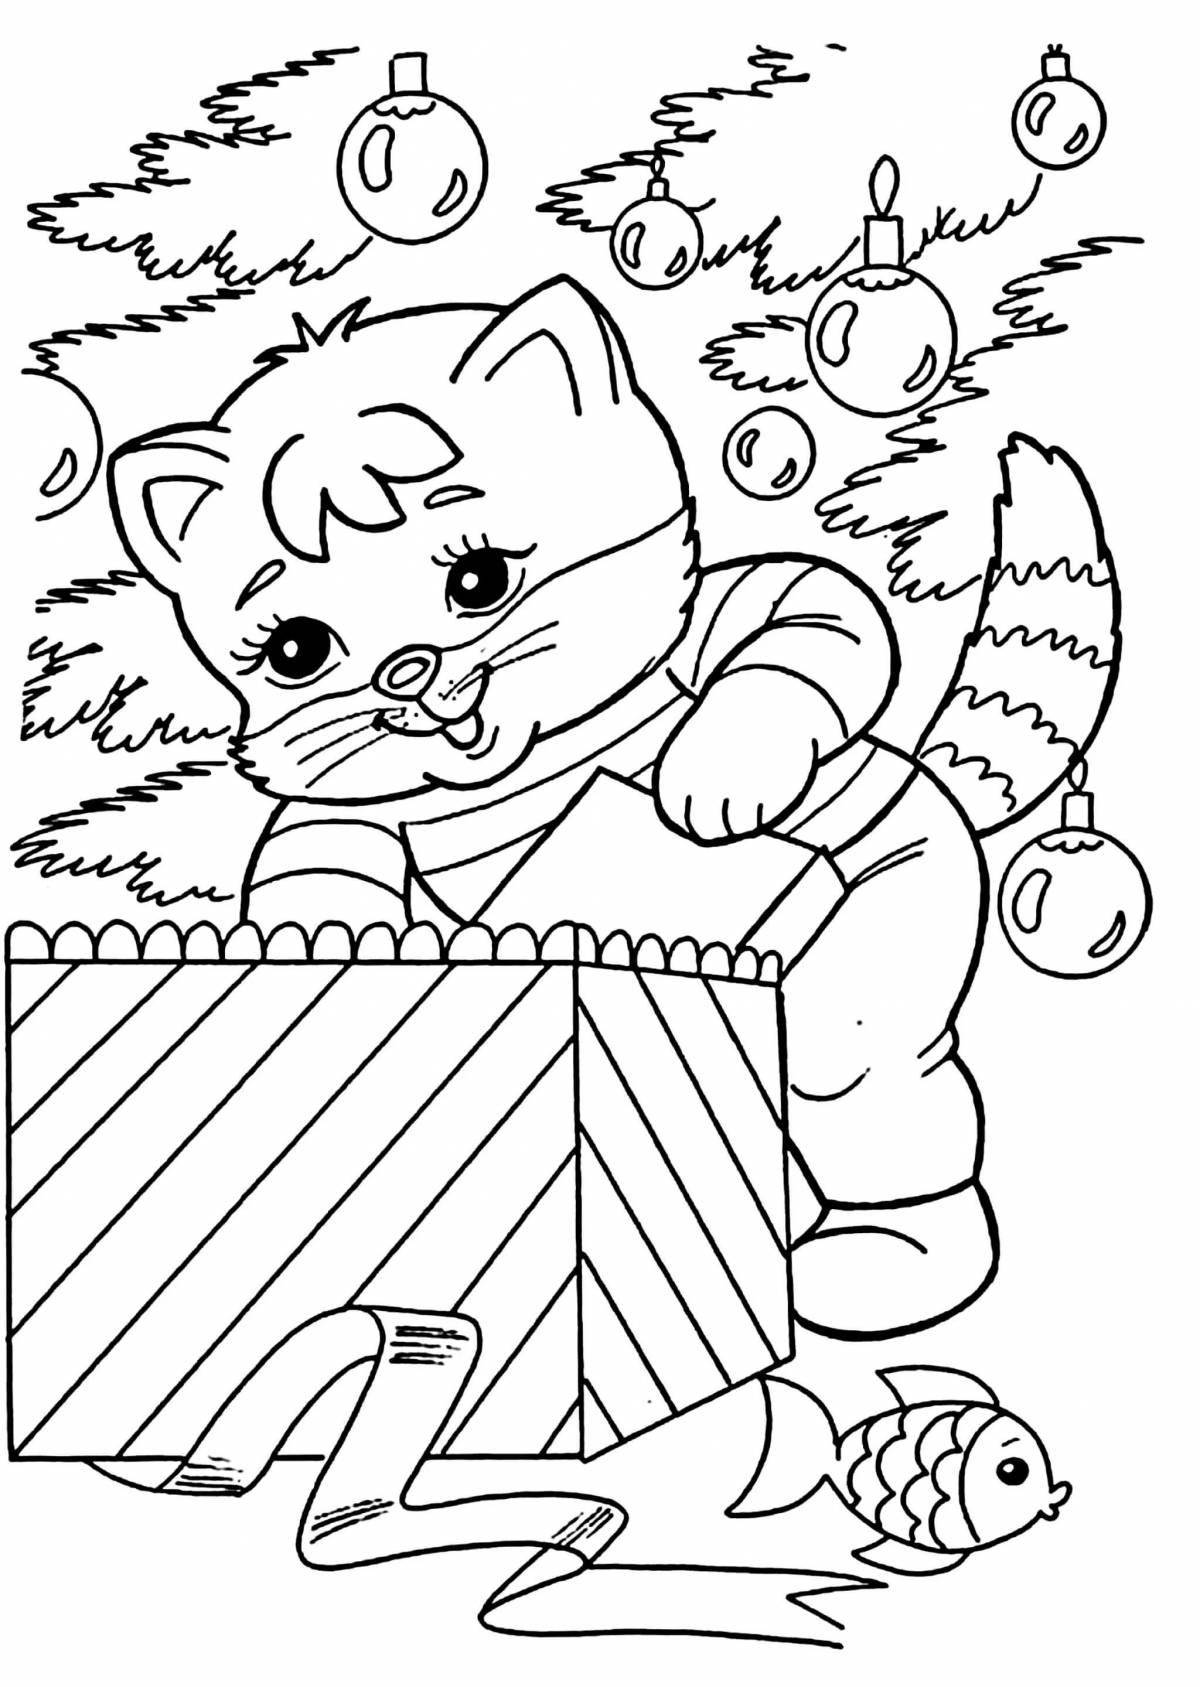 Cozy cat in a box coloring page